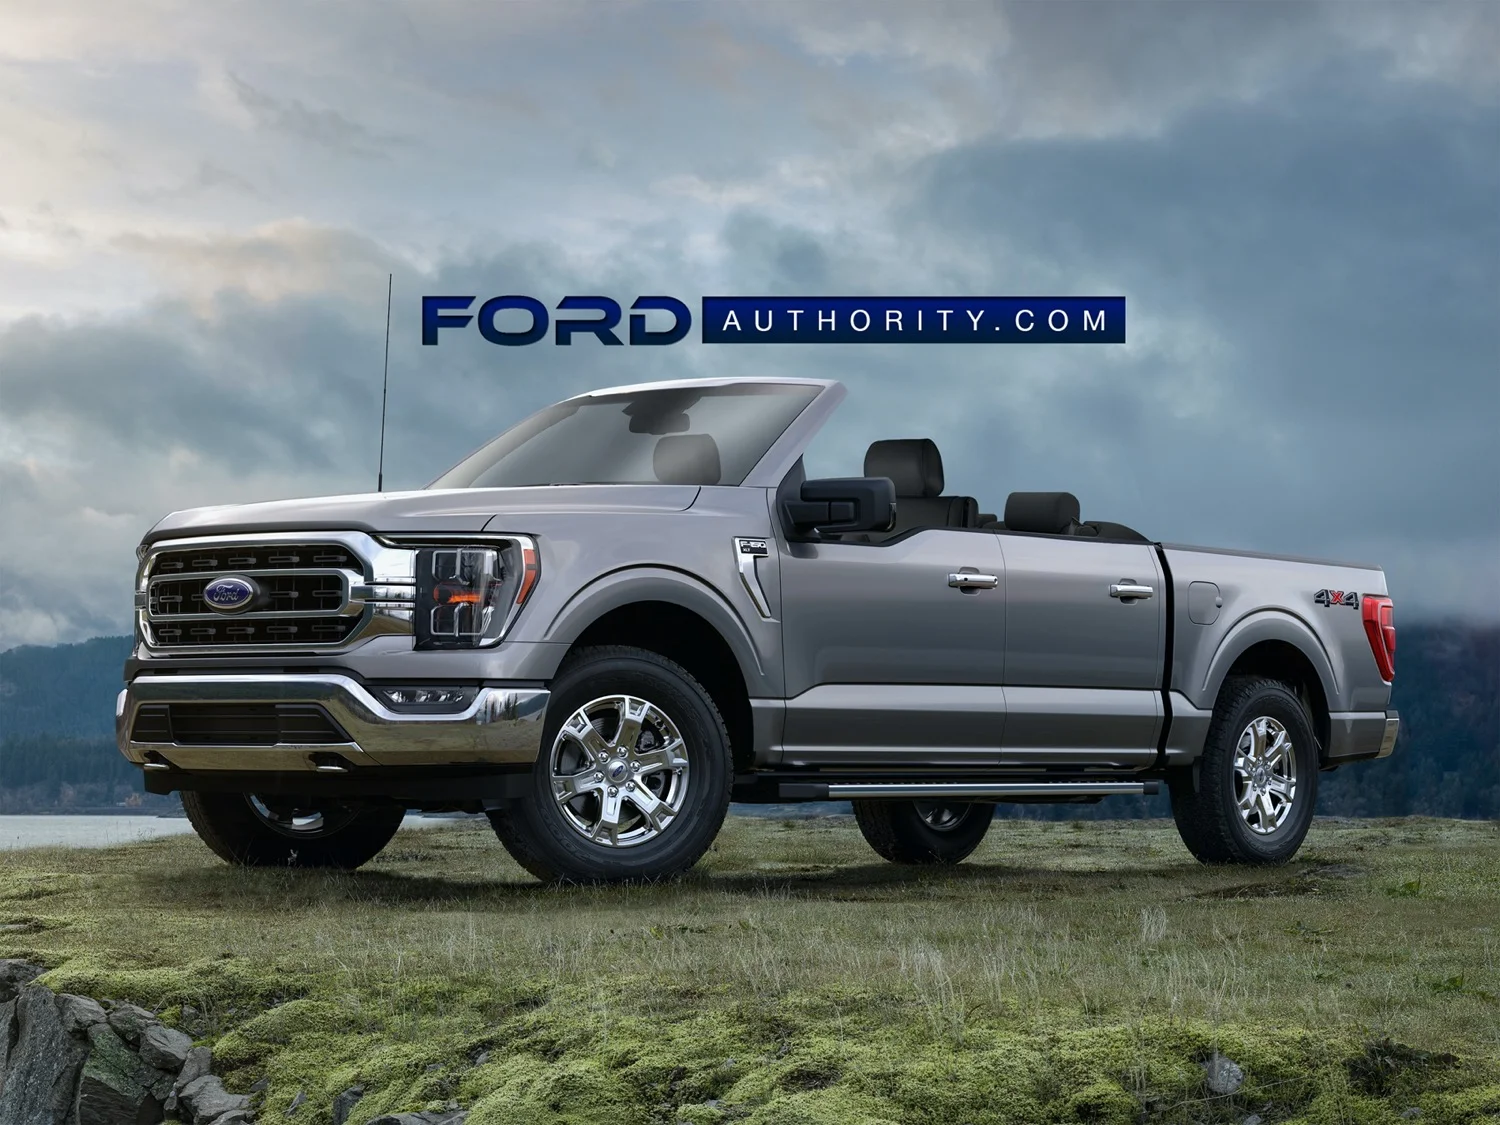 22 Ford F 150 Convertible Introduced As Ultimate Open Air 4x4 Vehicle